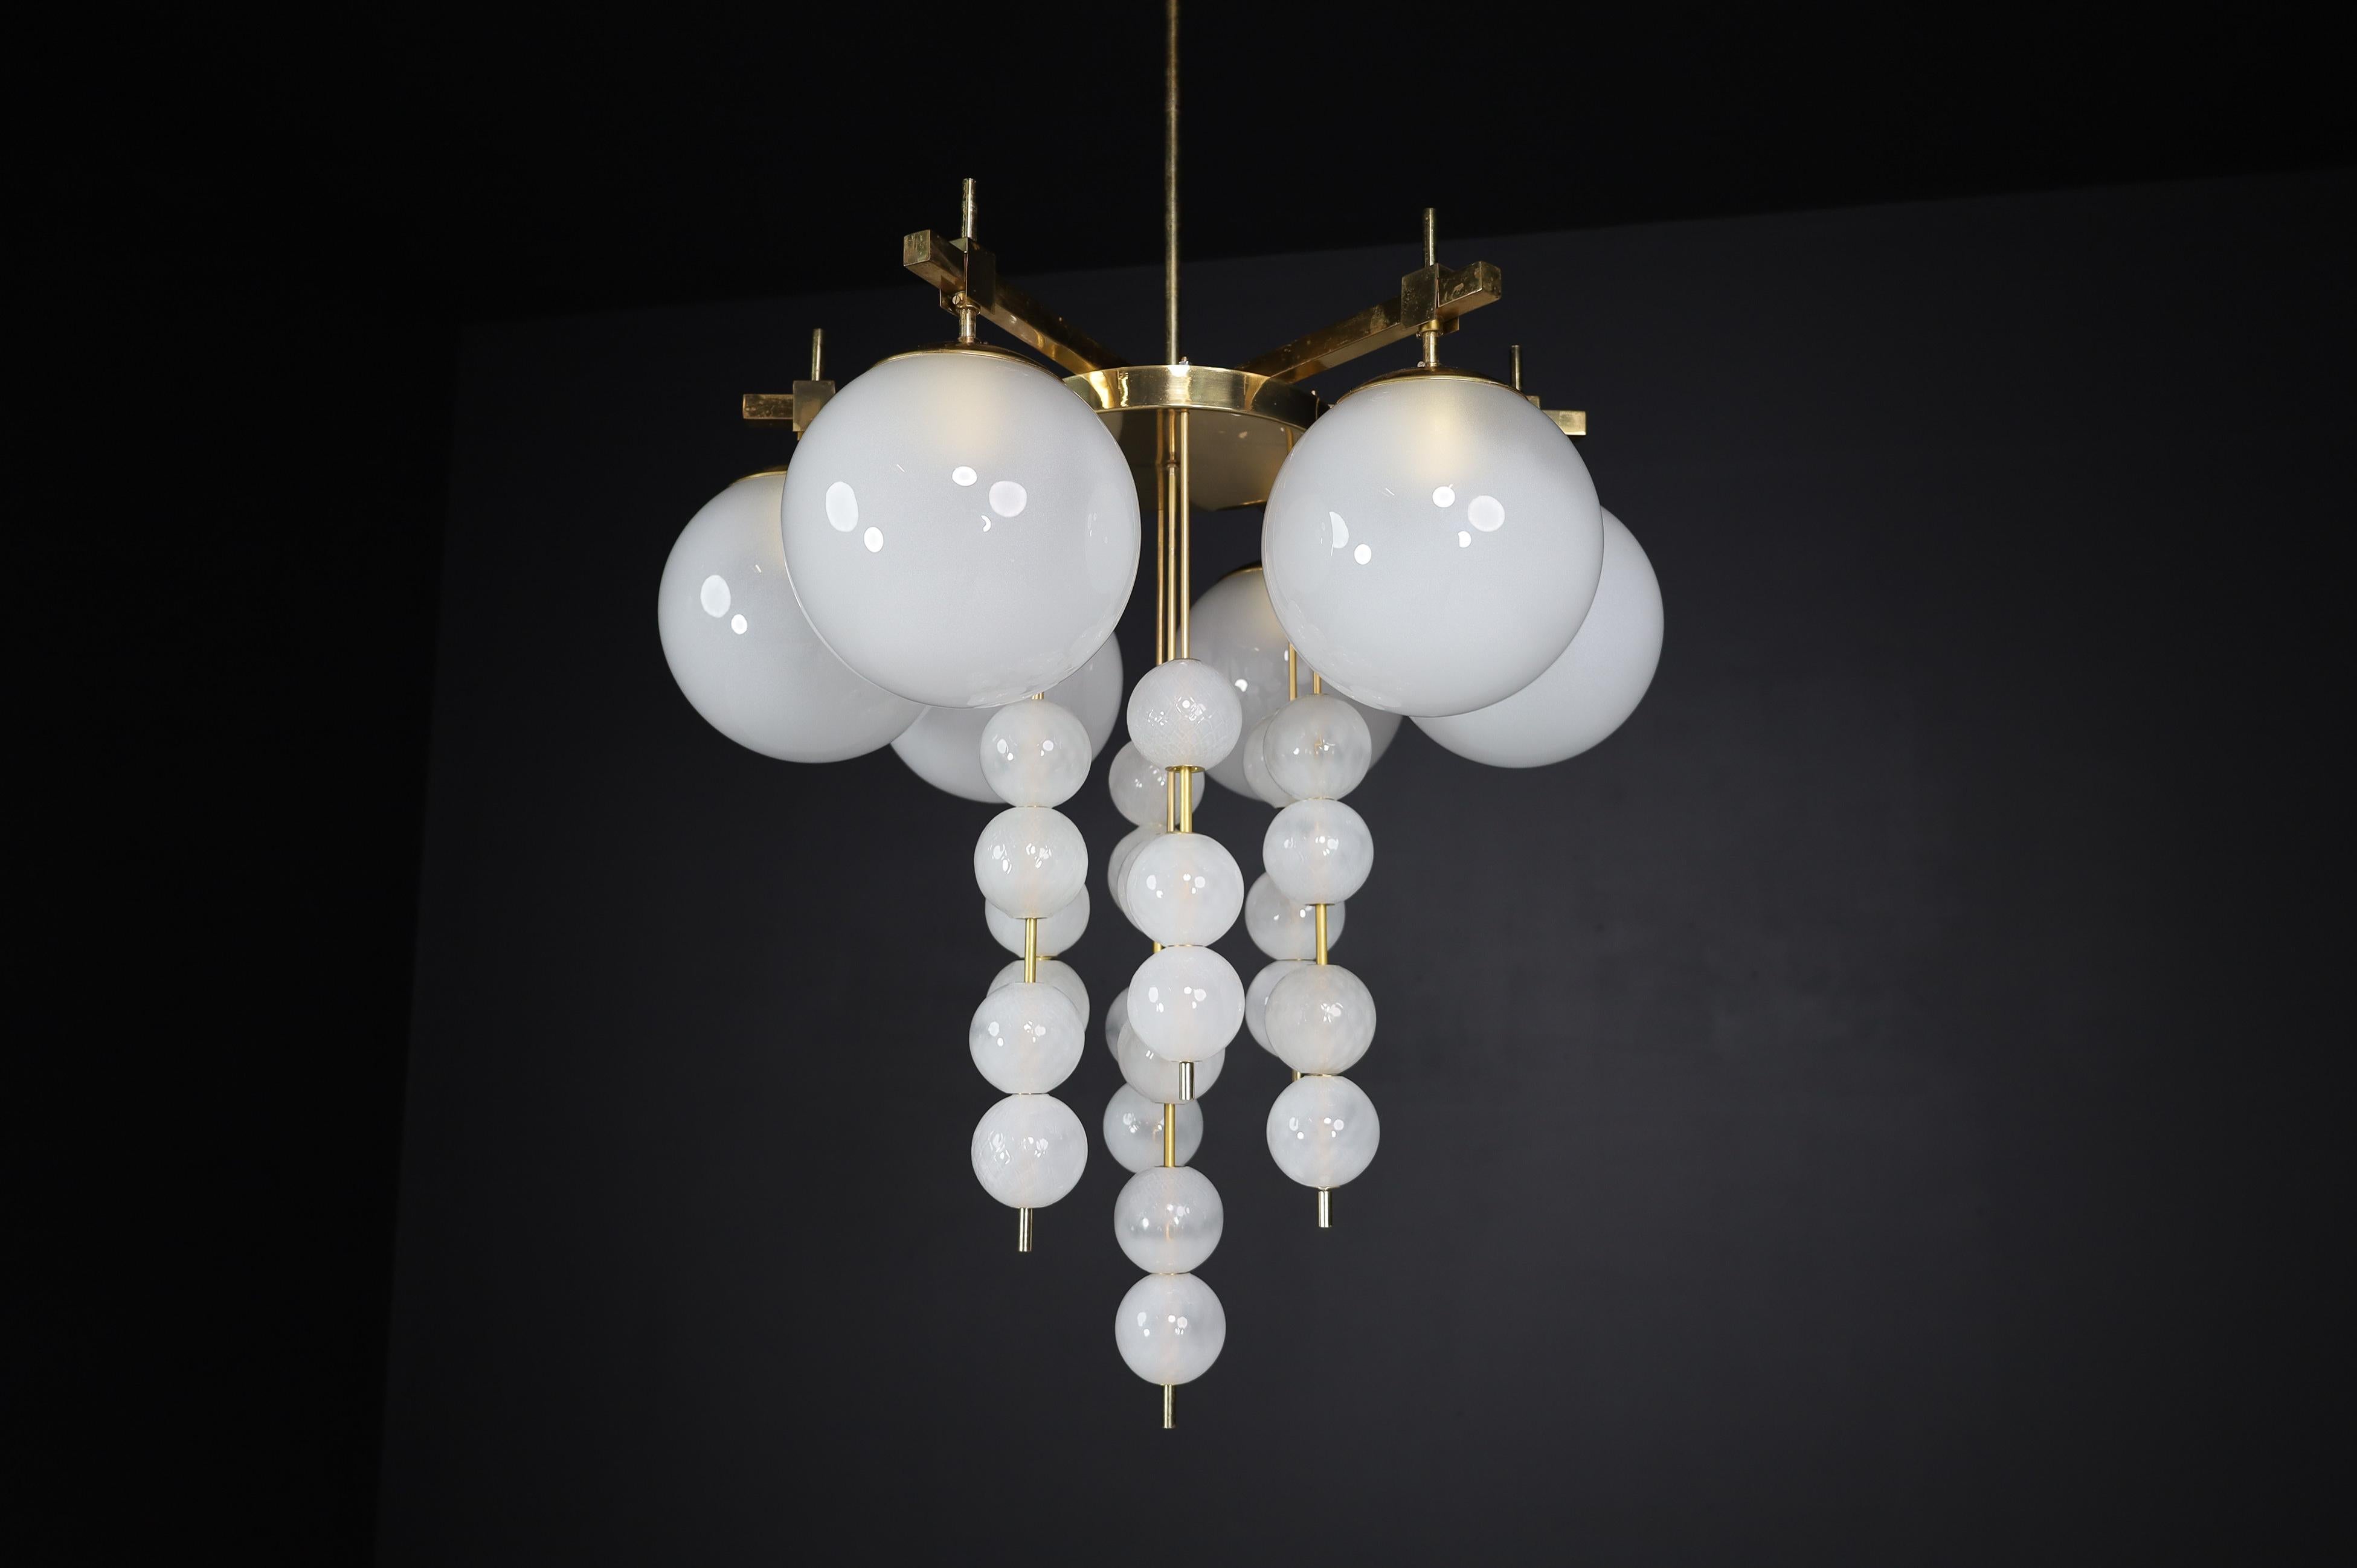 Brass chandelier with frosted glass globes, Czechia 1950s

A large chandelier with a brass fixture was produced and designed in Czechia in the 1960s. A total of six large frosted glass globes and multiple smaller structured frosted glass globes.